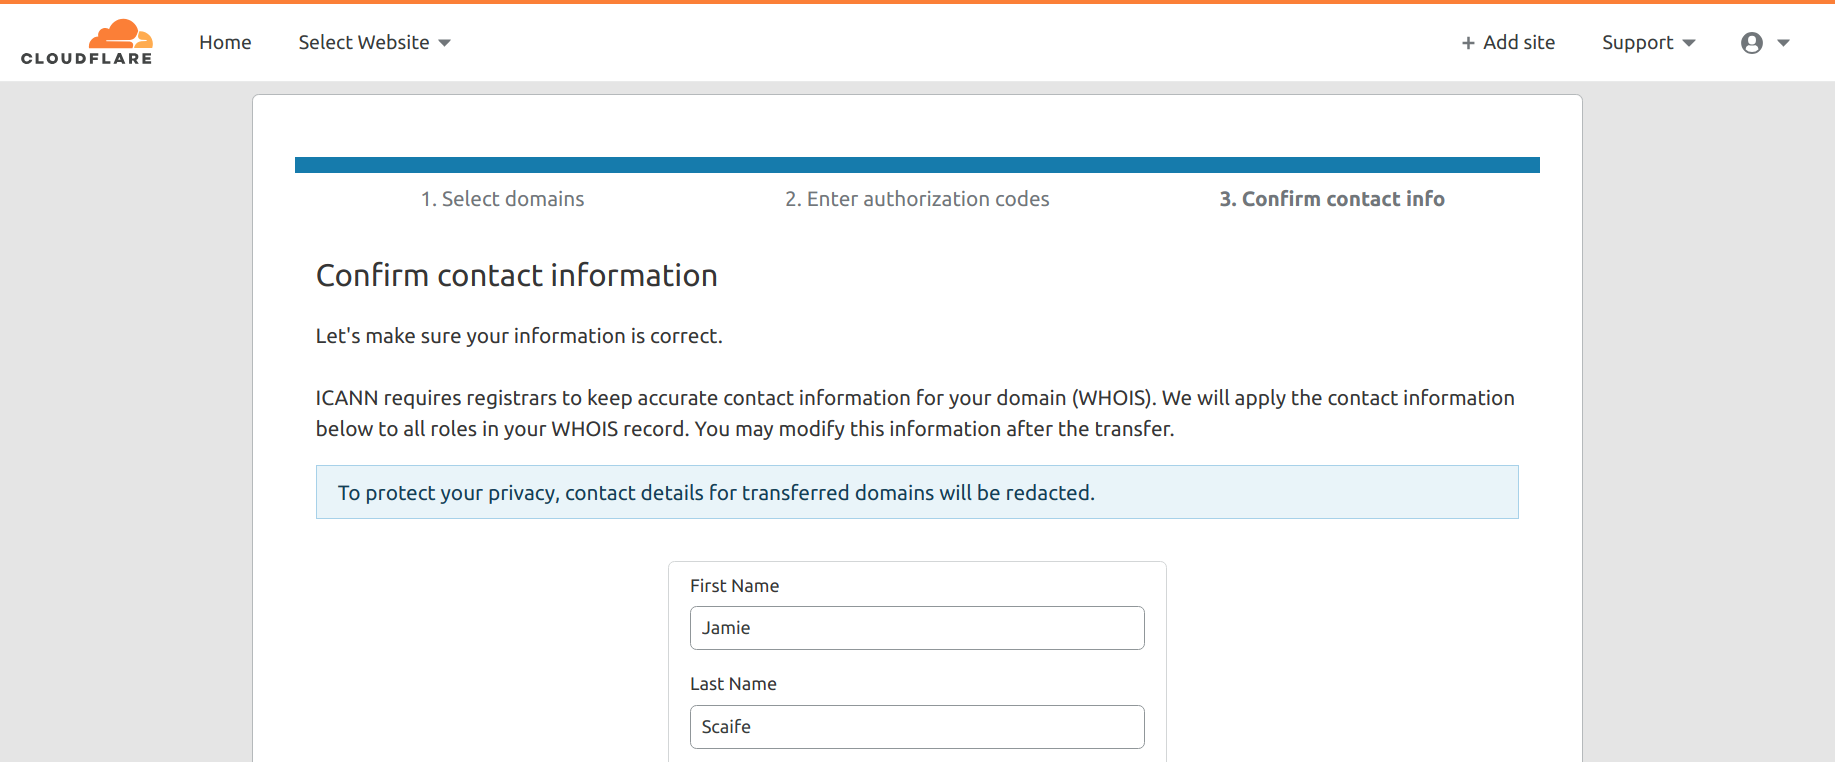 A screenshot of form for entering the desired WHOIS contact information for jamieweb.net.